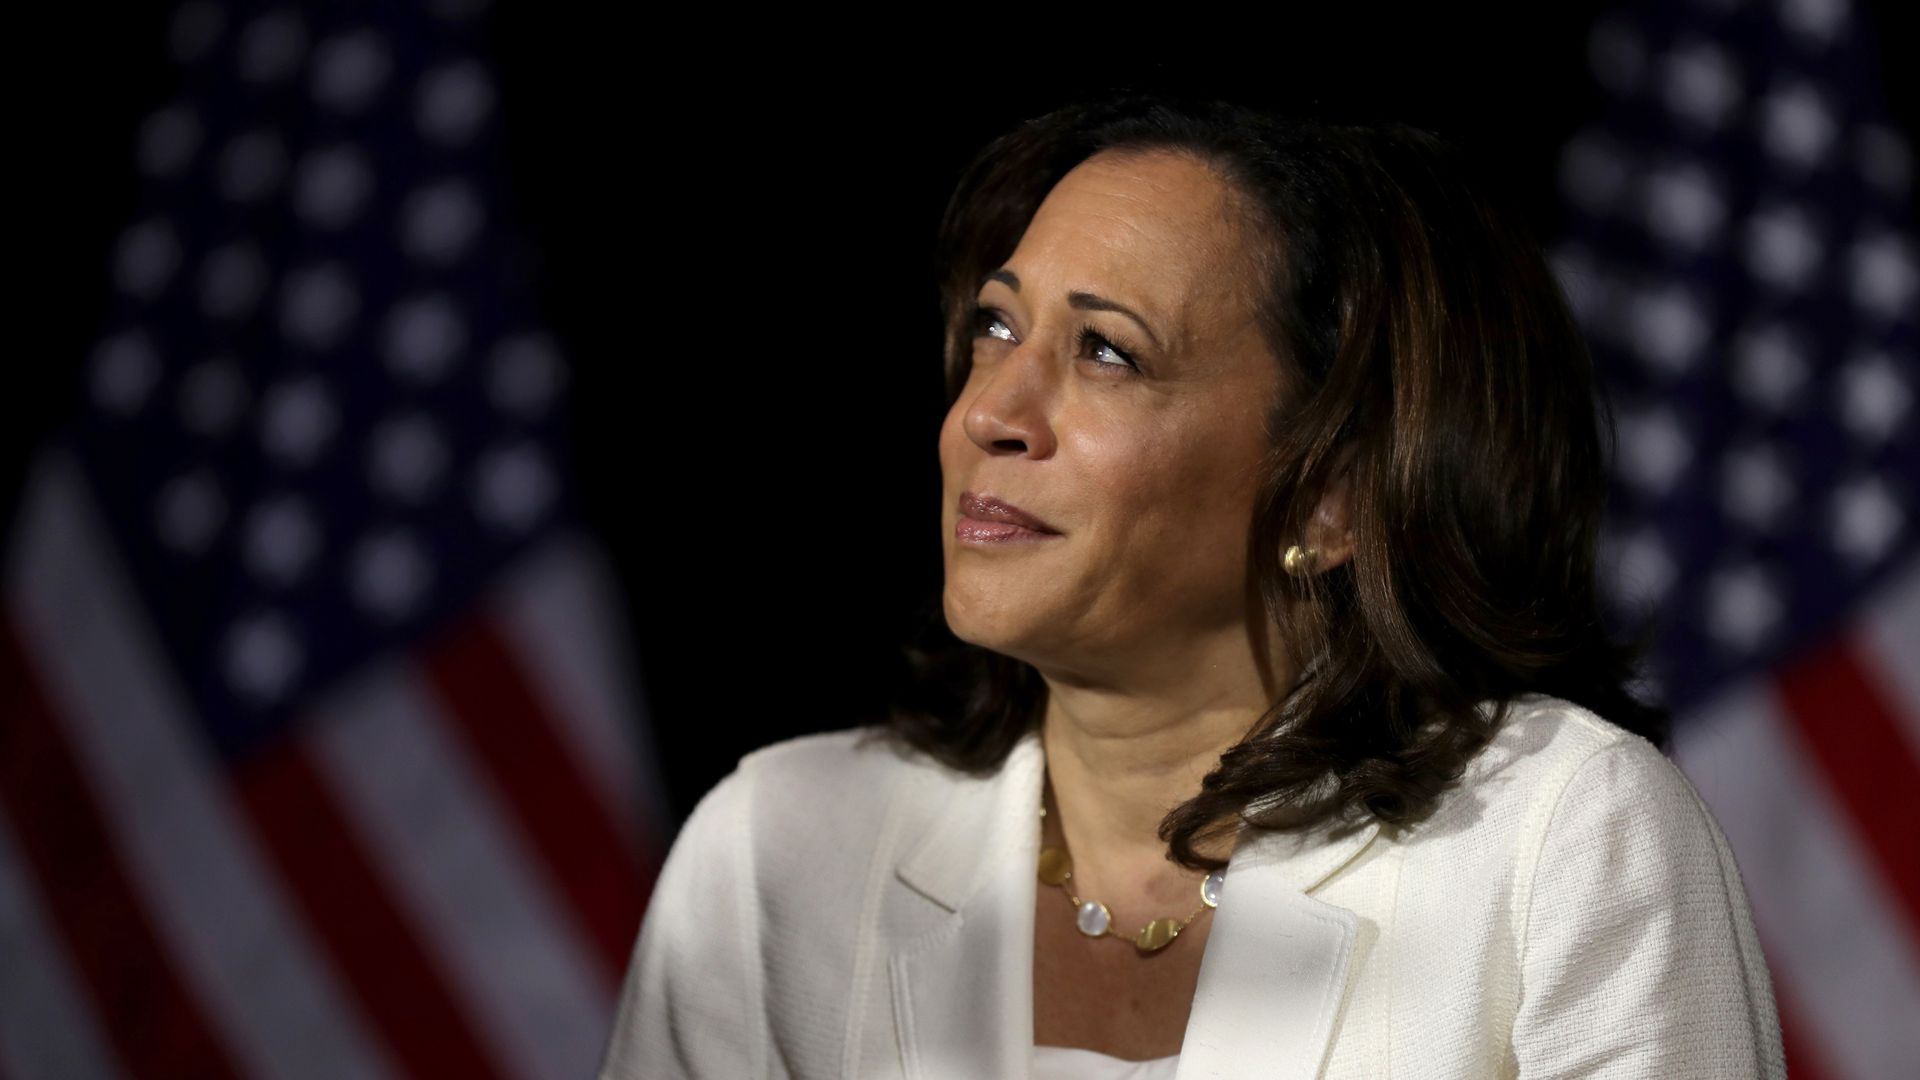 Kamala Harris joins CNN climate change town hall after criticism from activists - Axios